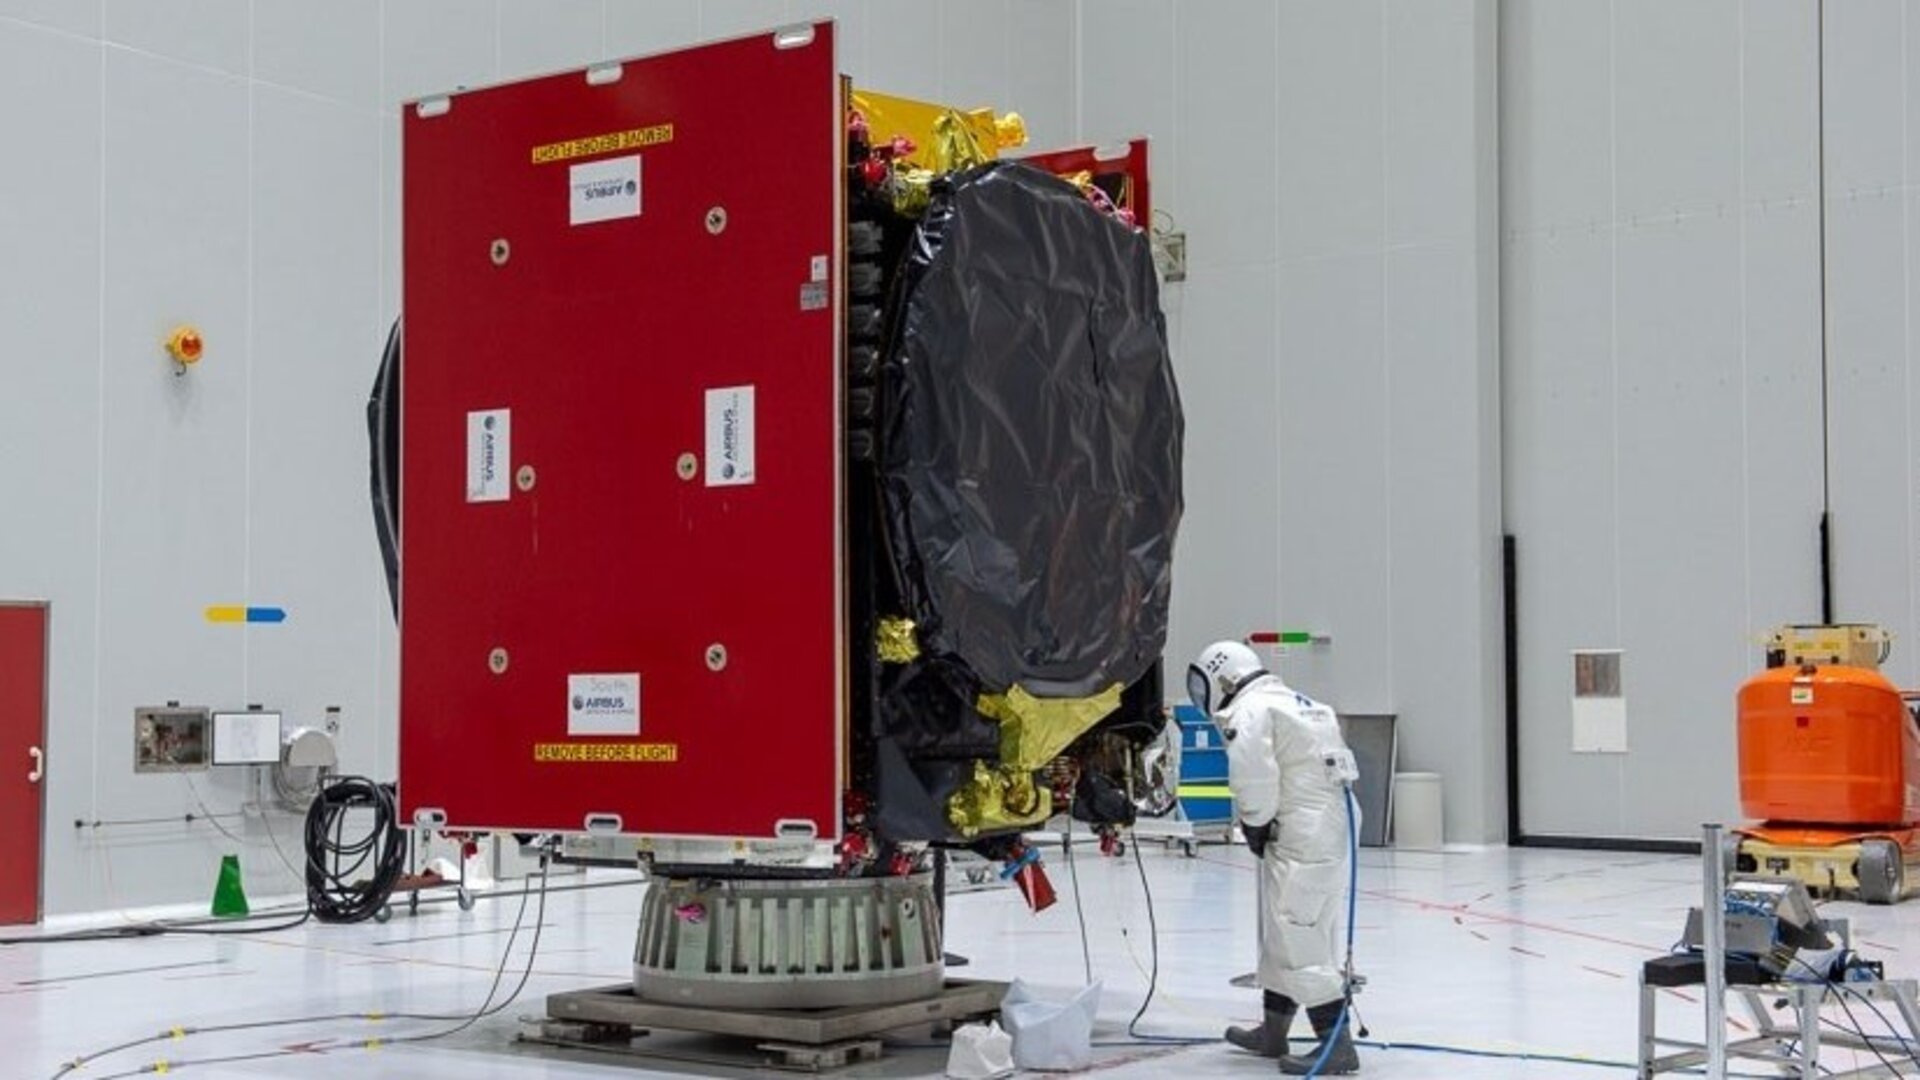 The EDRS-C satellite has been fuelled ahead of its launch